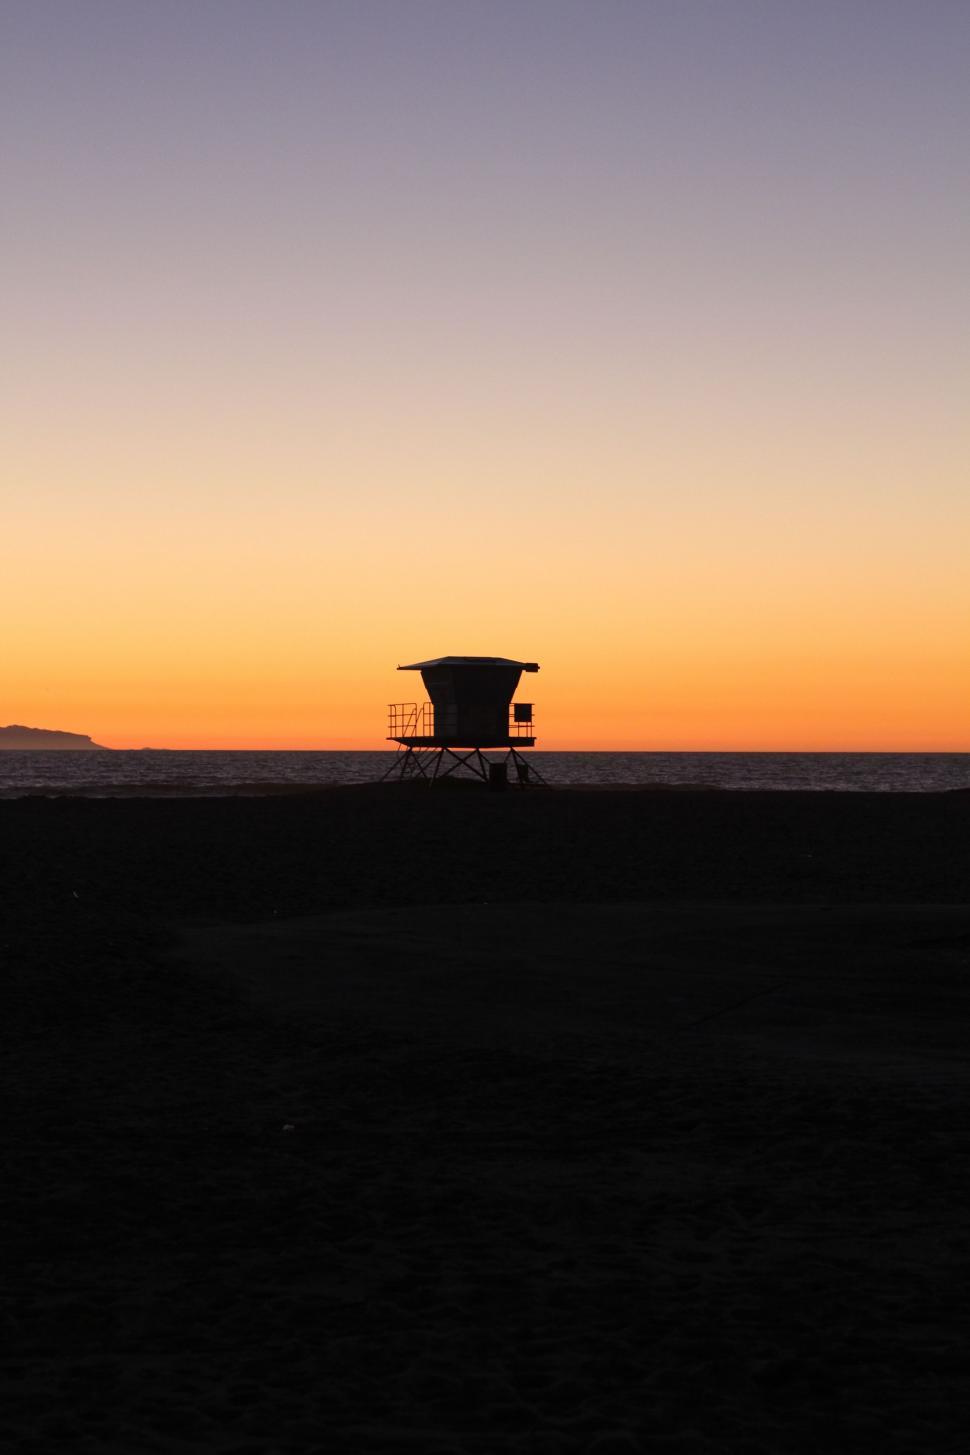 Free Image of Silo Standing in Field at Sunset 